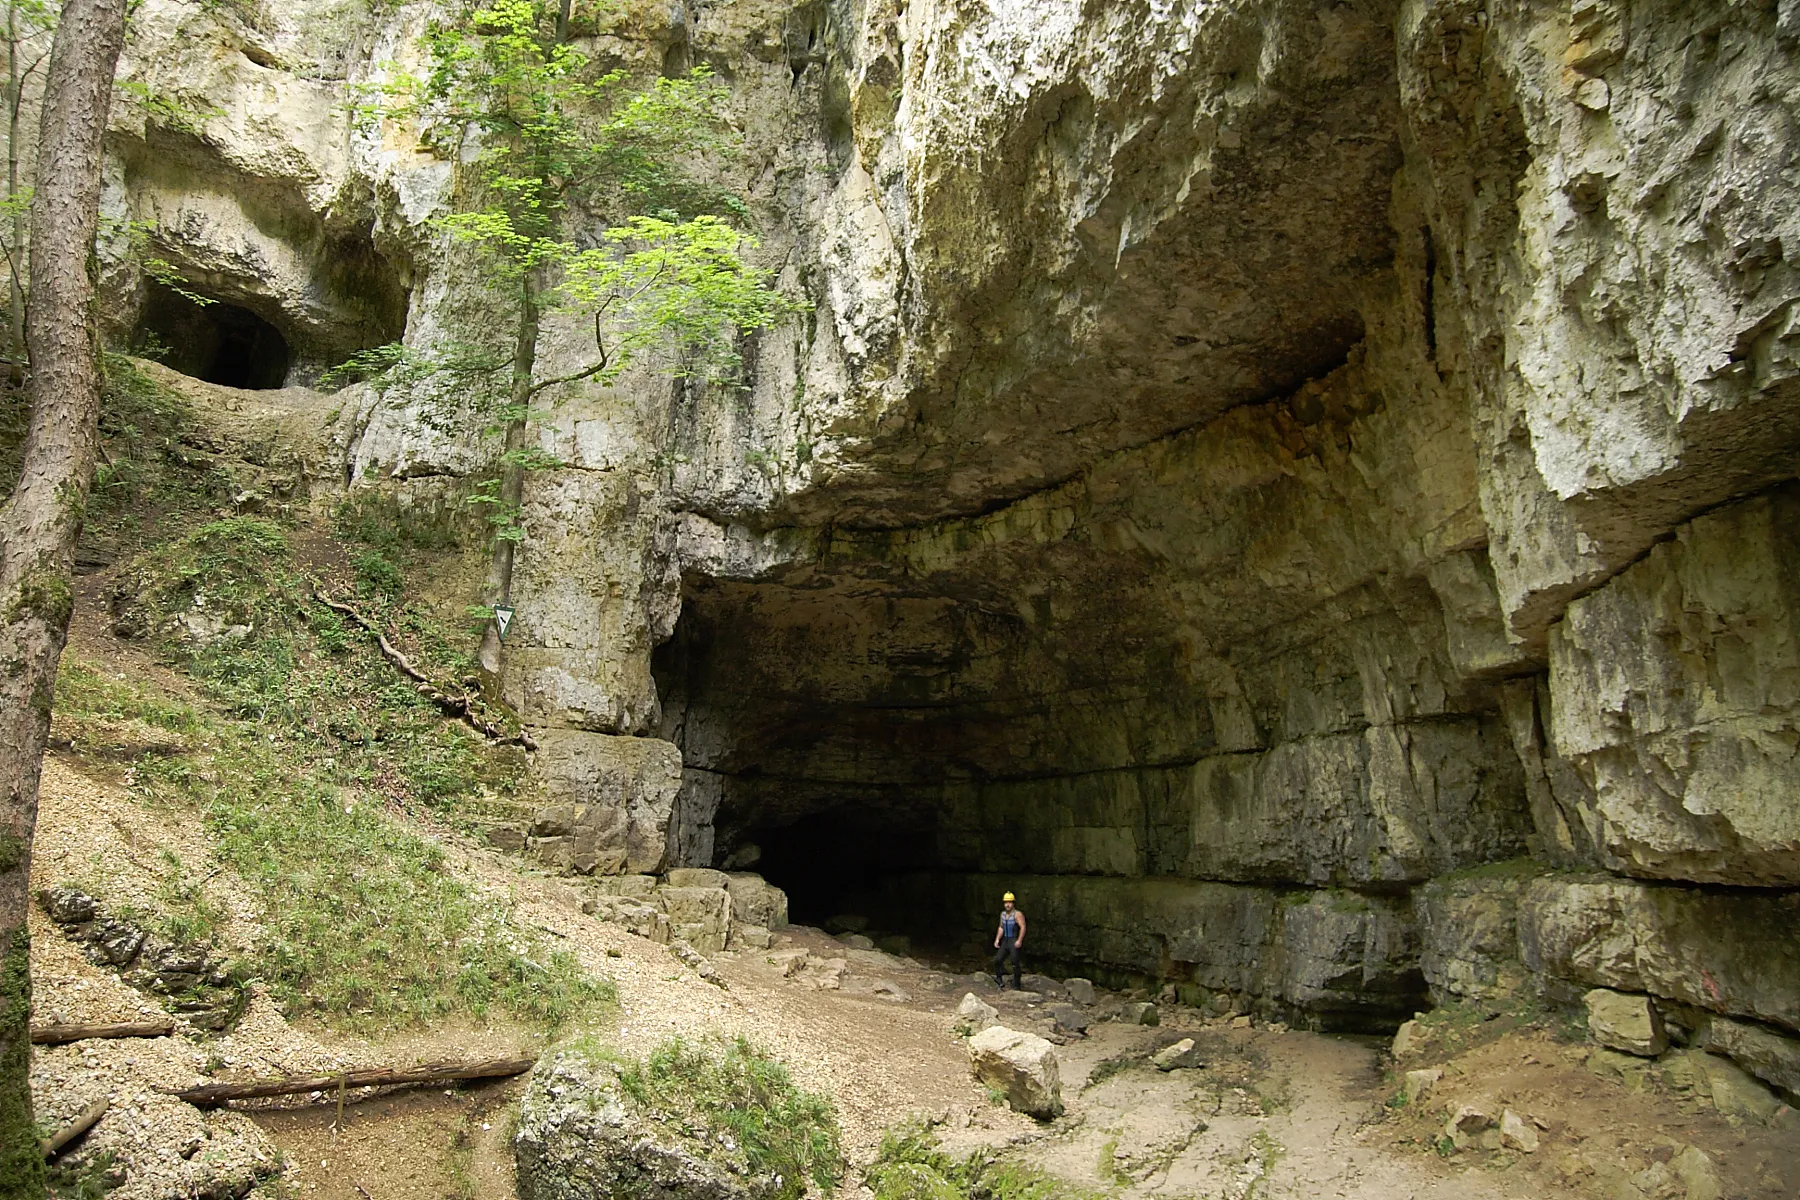 Photo showing: Falkensteiner Höhle, 4 km NE of Bad Urach, Swabian Alb.  Its portal of 10 m height documents its former relevance as a huge water cave. Today water emerges from the portal episodically only with extreme precipitation.
A tiny runnel sinks down a Ponor within the cave, 20m from the cave’s entrance and exits as brook “Elsach” not far below the portal.